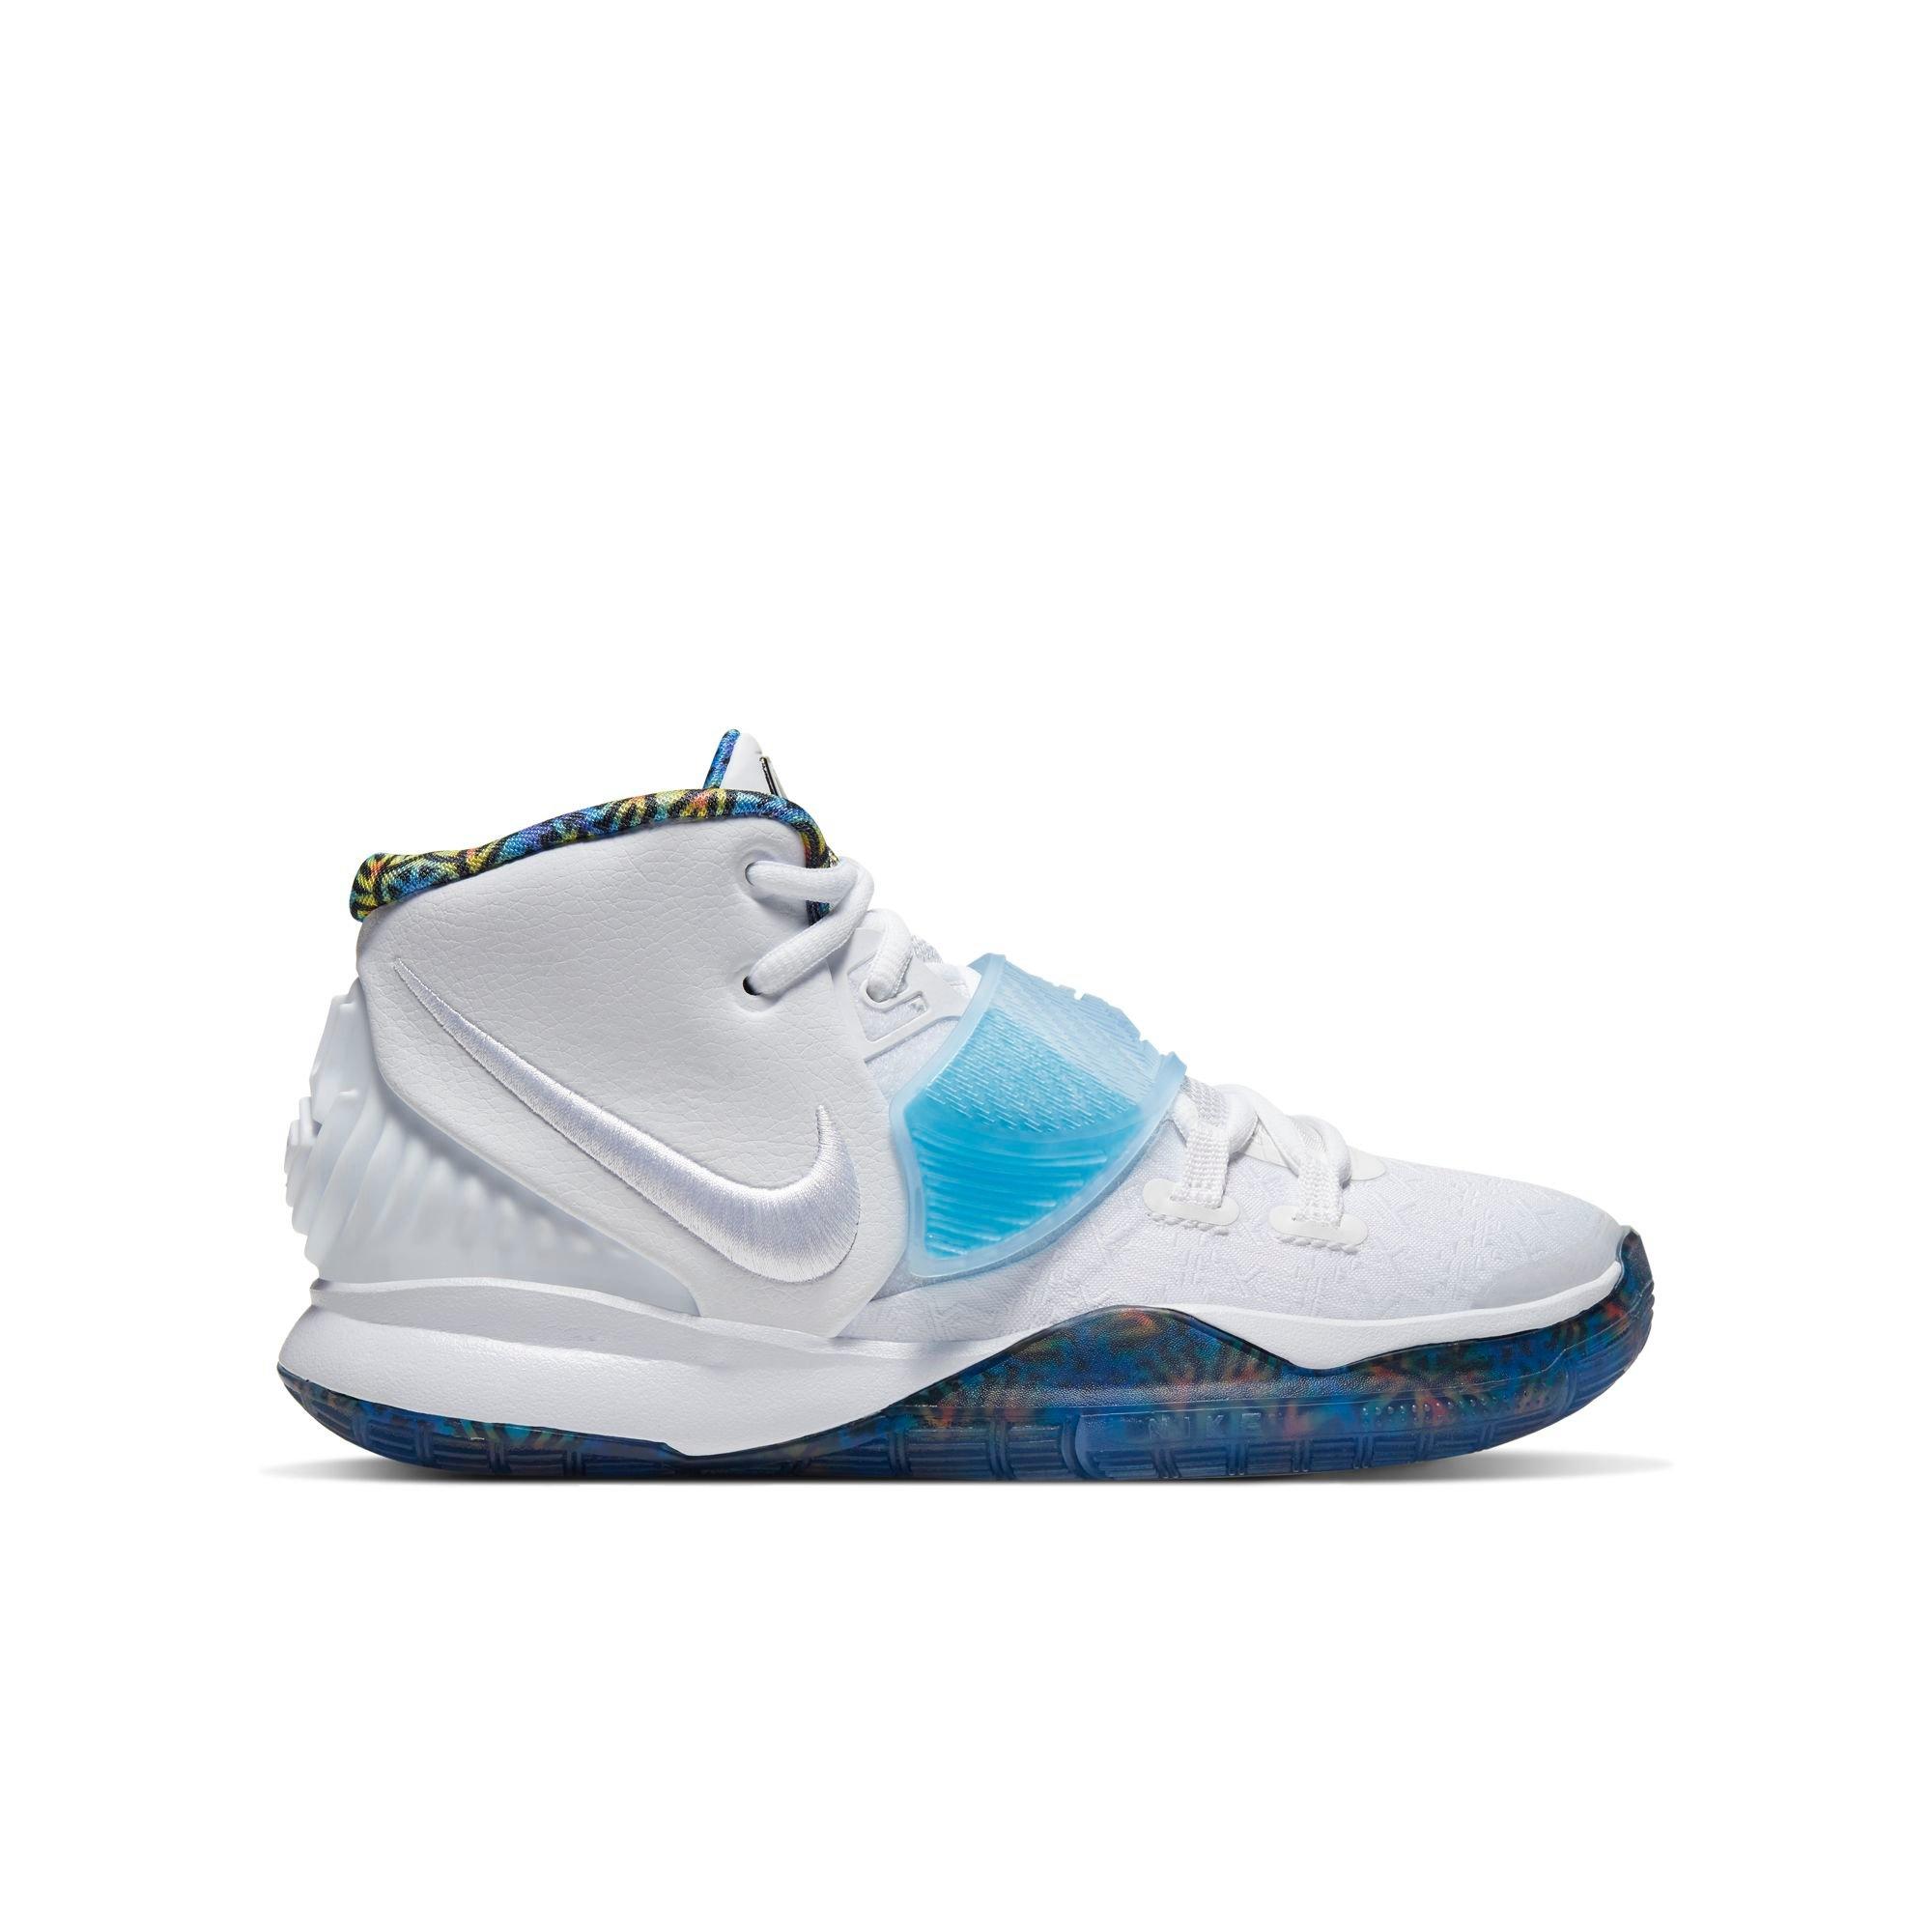 kyrie irving shoes white and blue